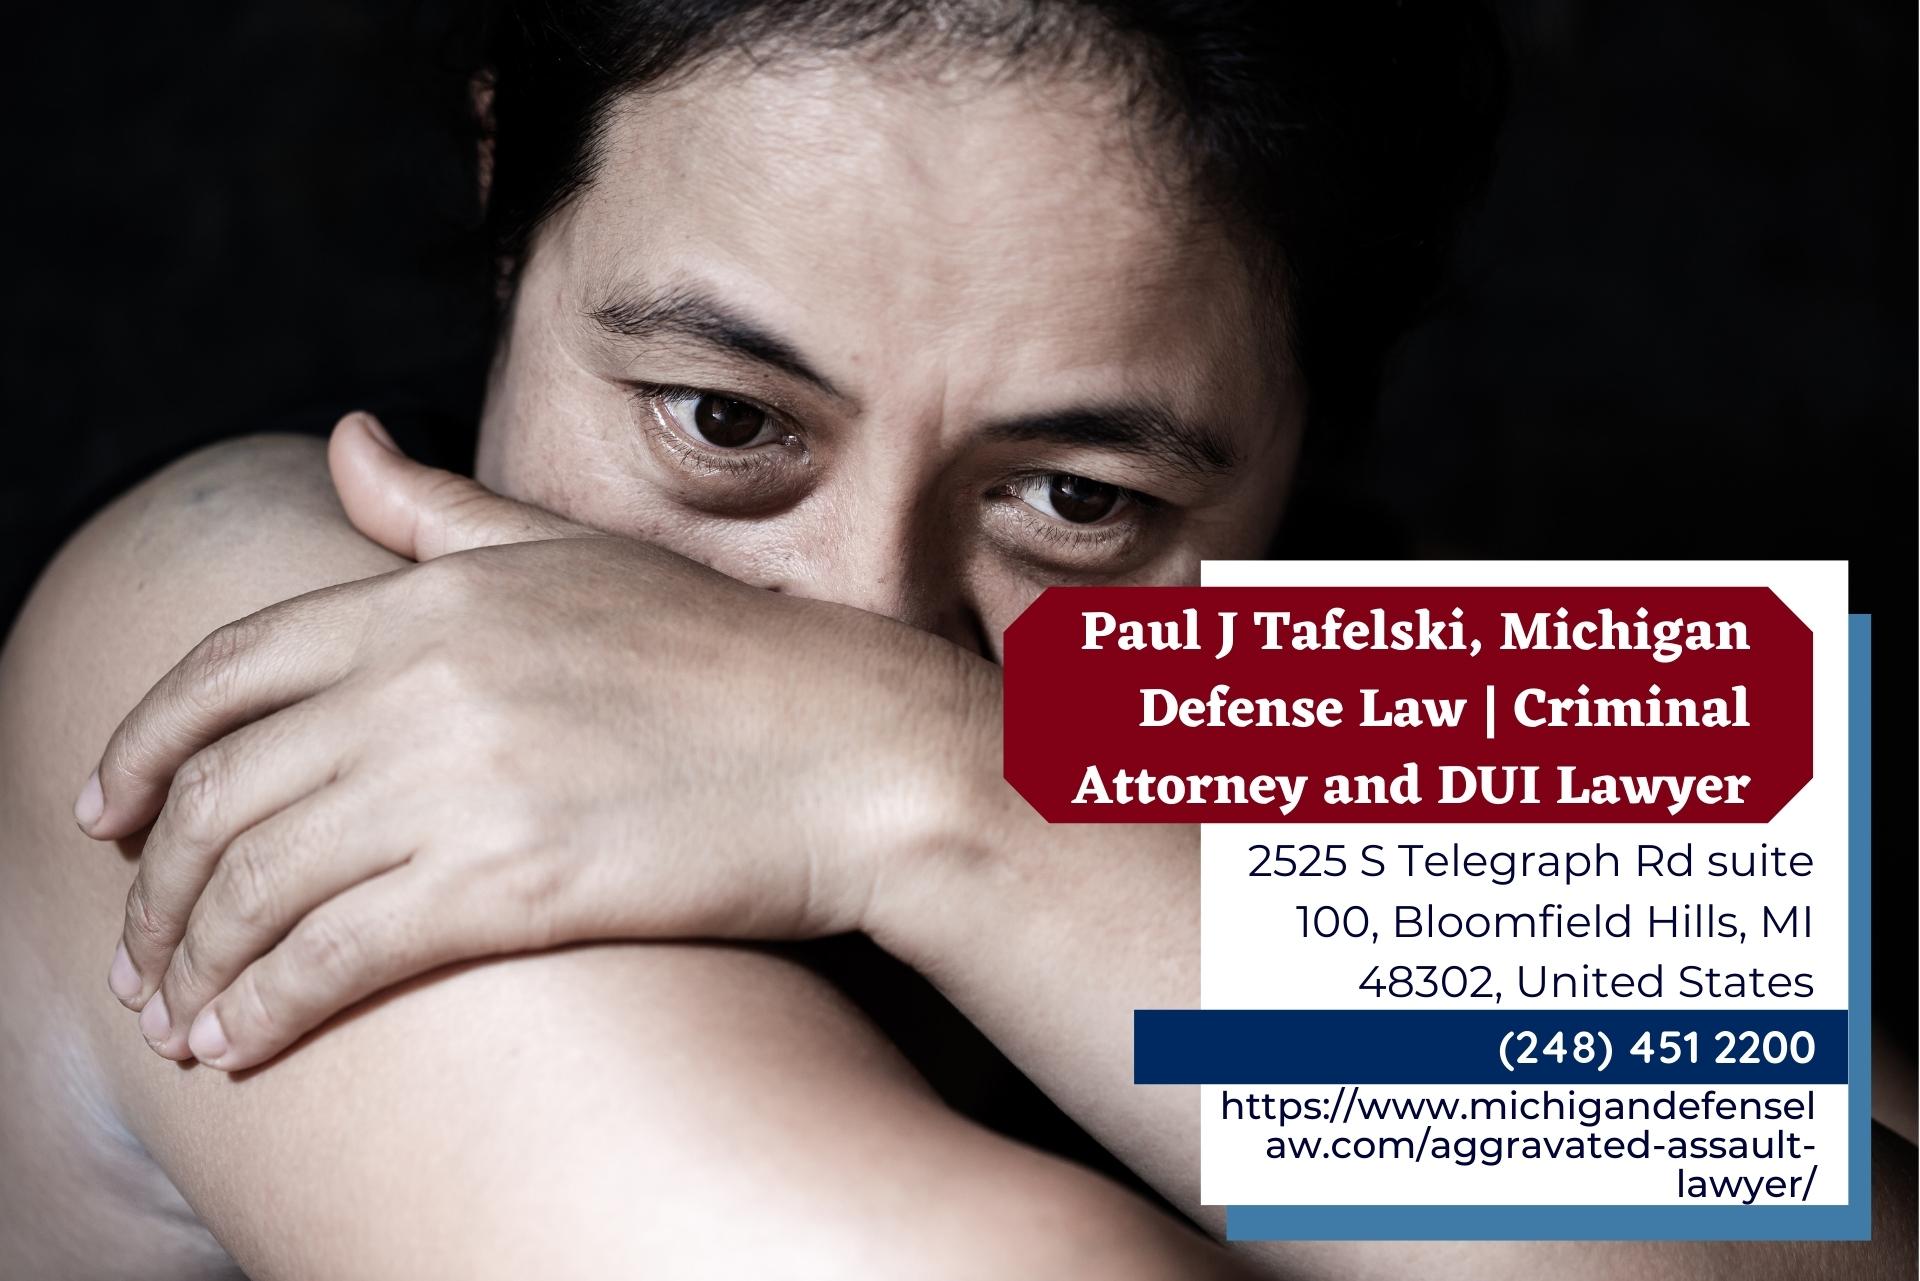 Experienced Michigan Aggravated Assault Lawyer by Paul J Tafelski